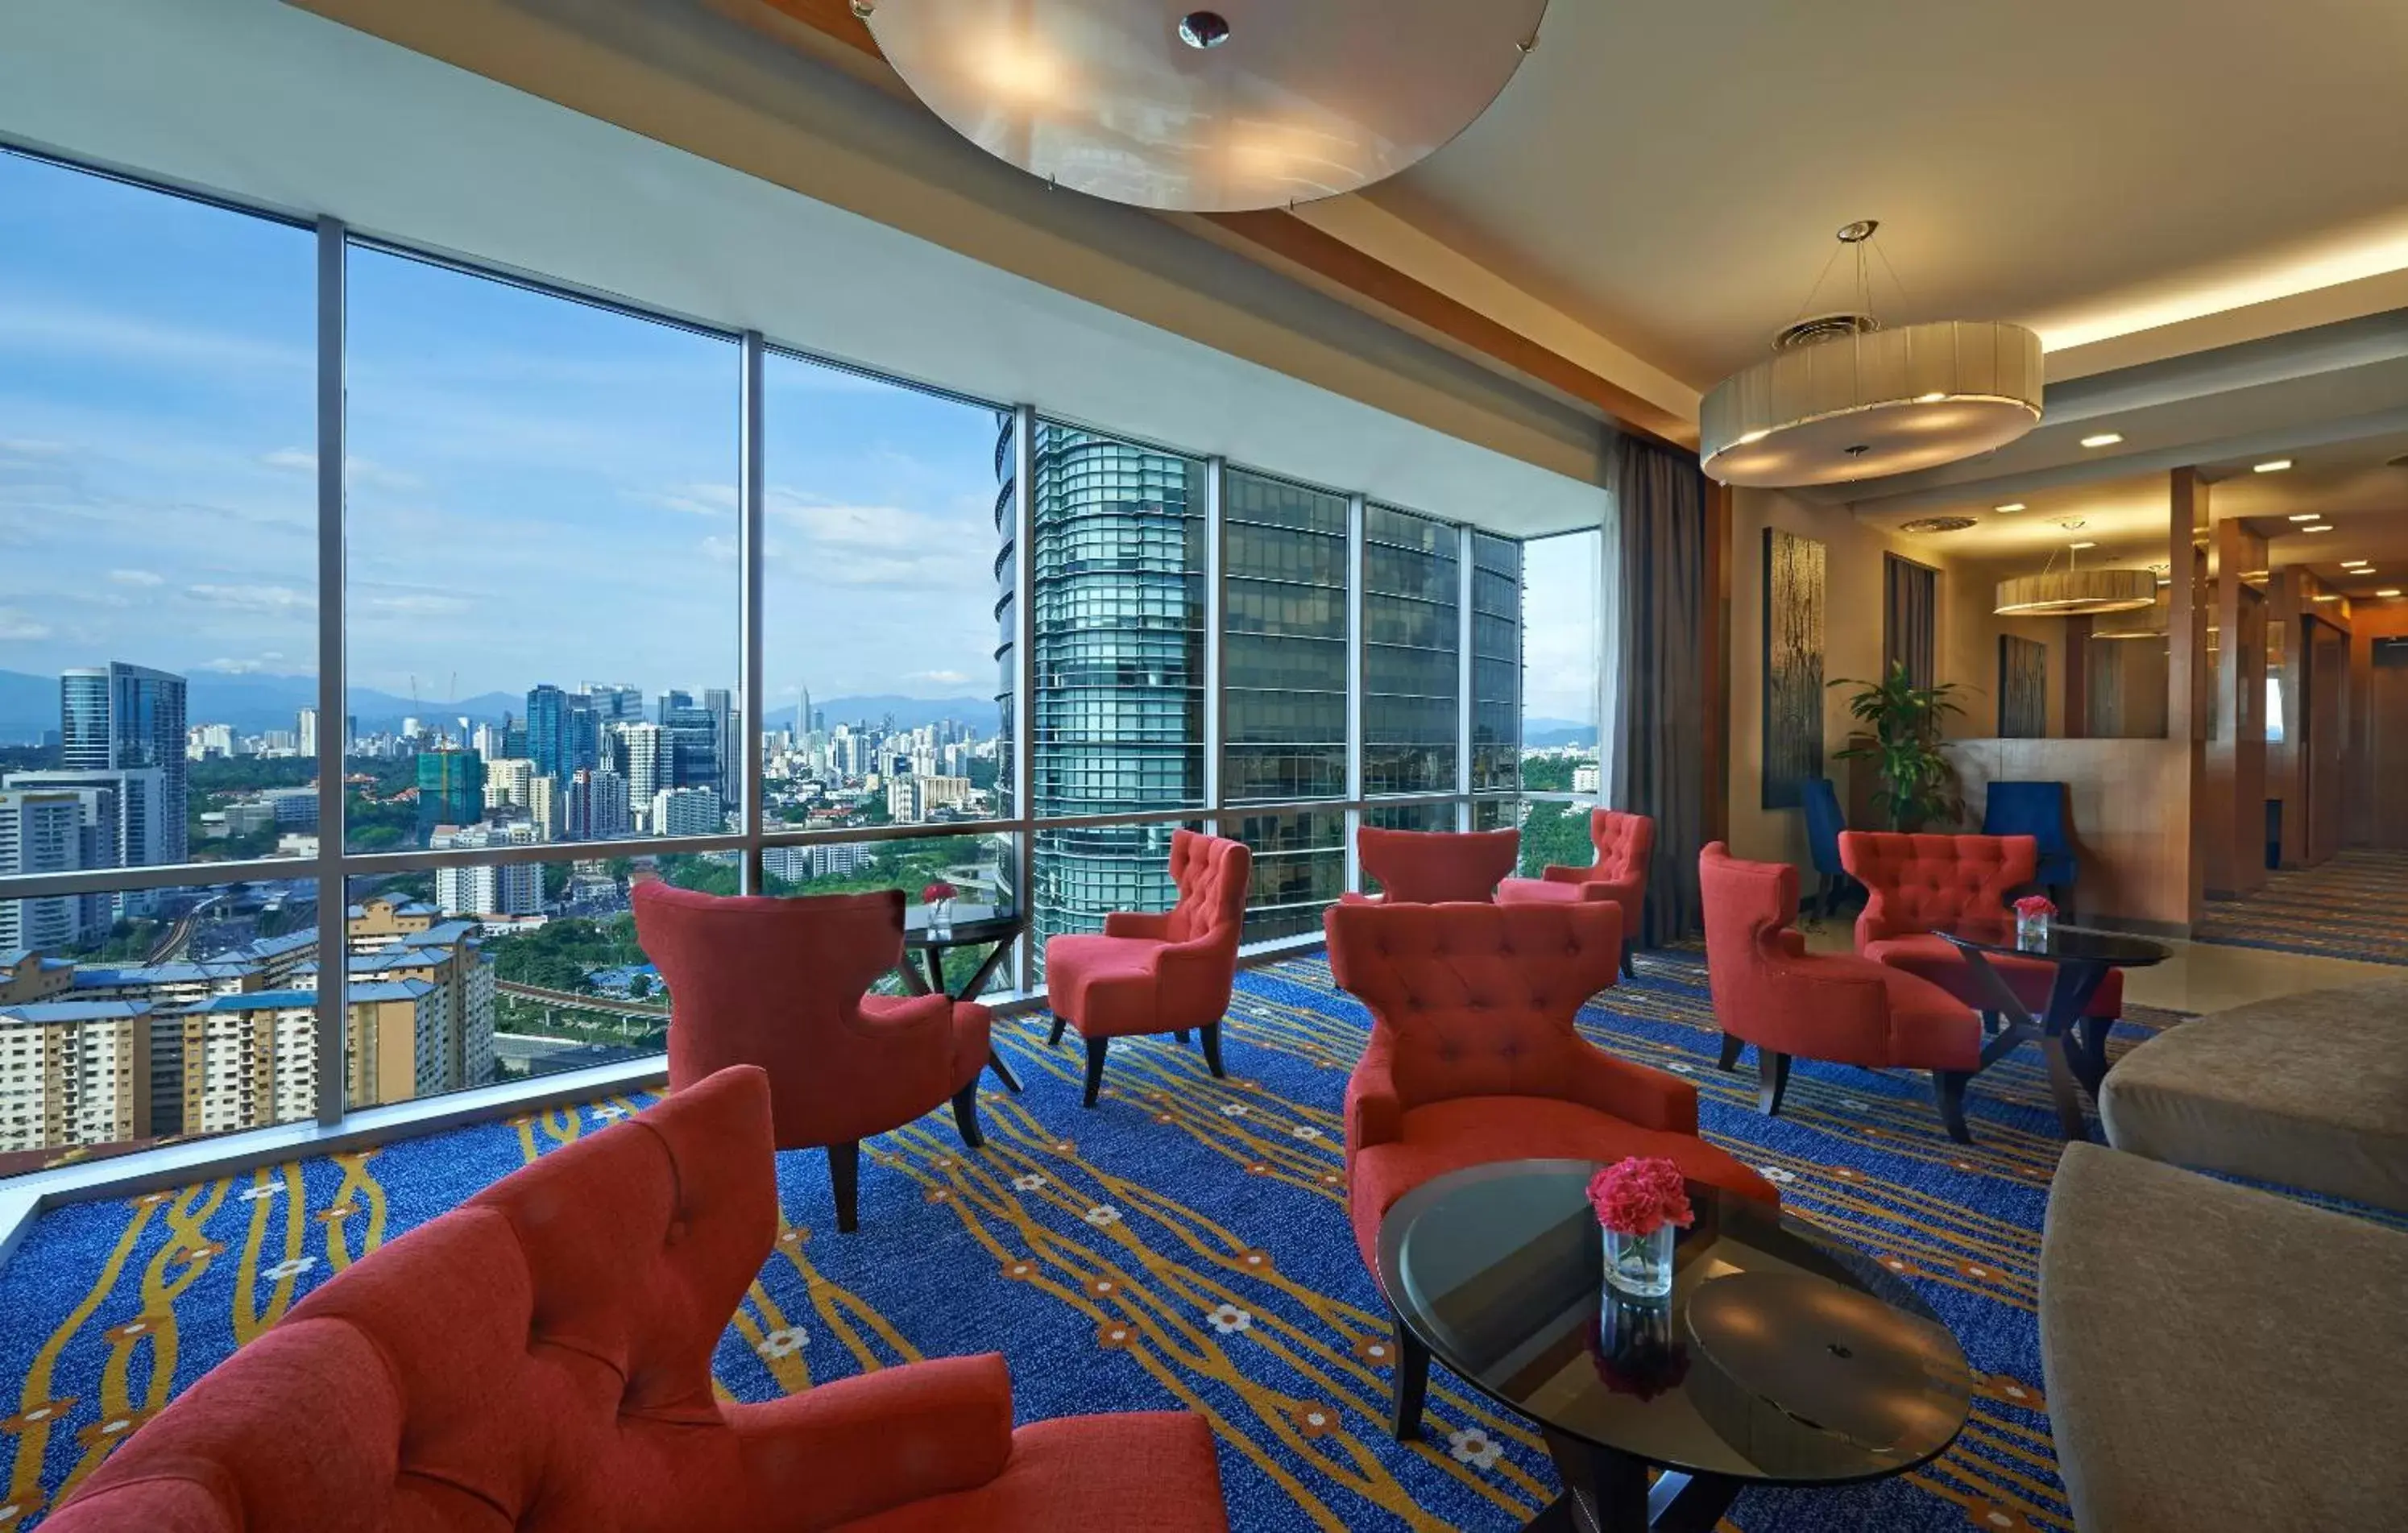 Property building in The Gardens – A St Giles Signature Hotel & Residences, Kuala Lumpur